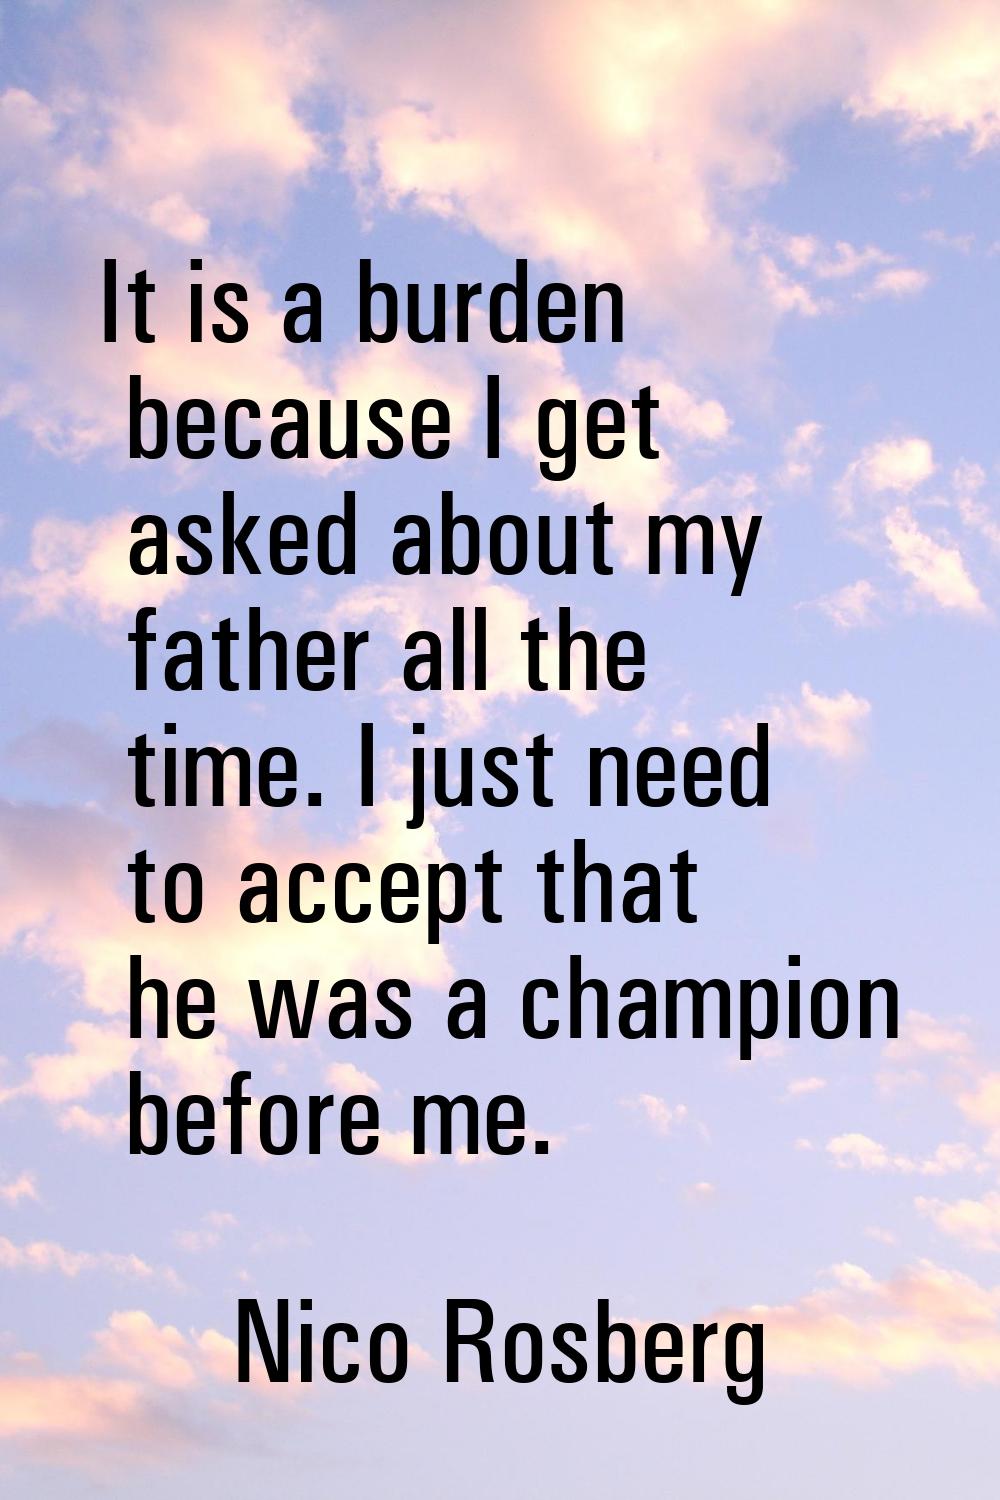 It is a burden because I get asked about my father all the time. I just need to accept that he was 